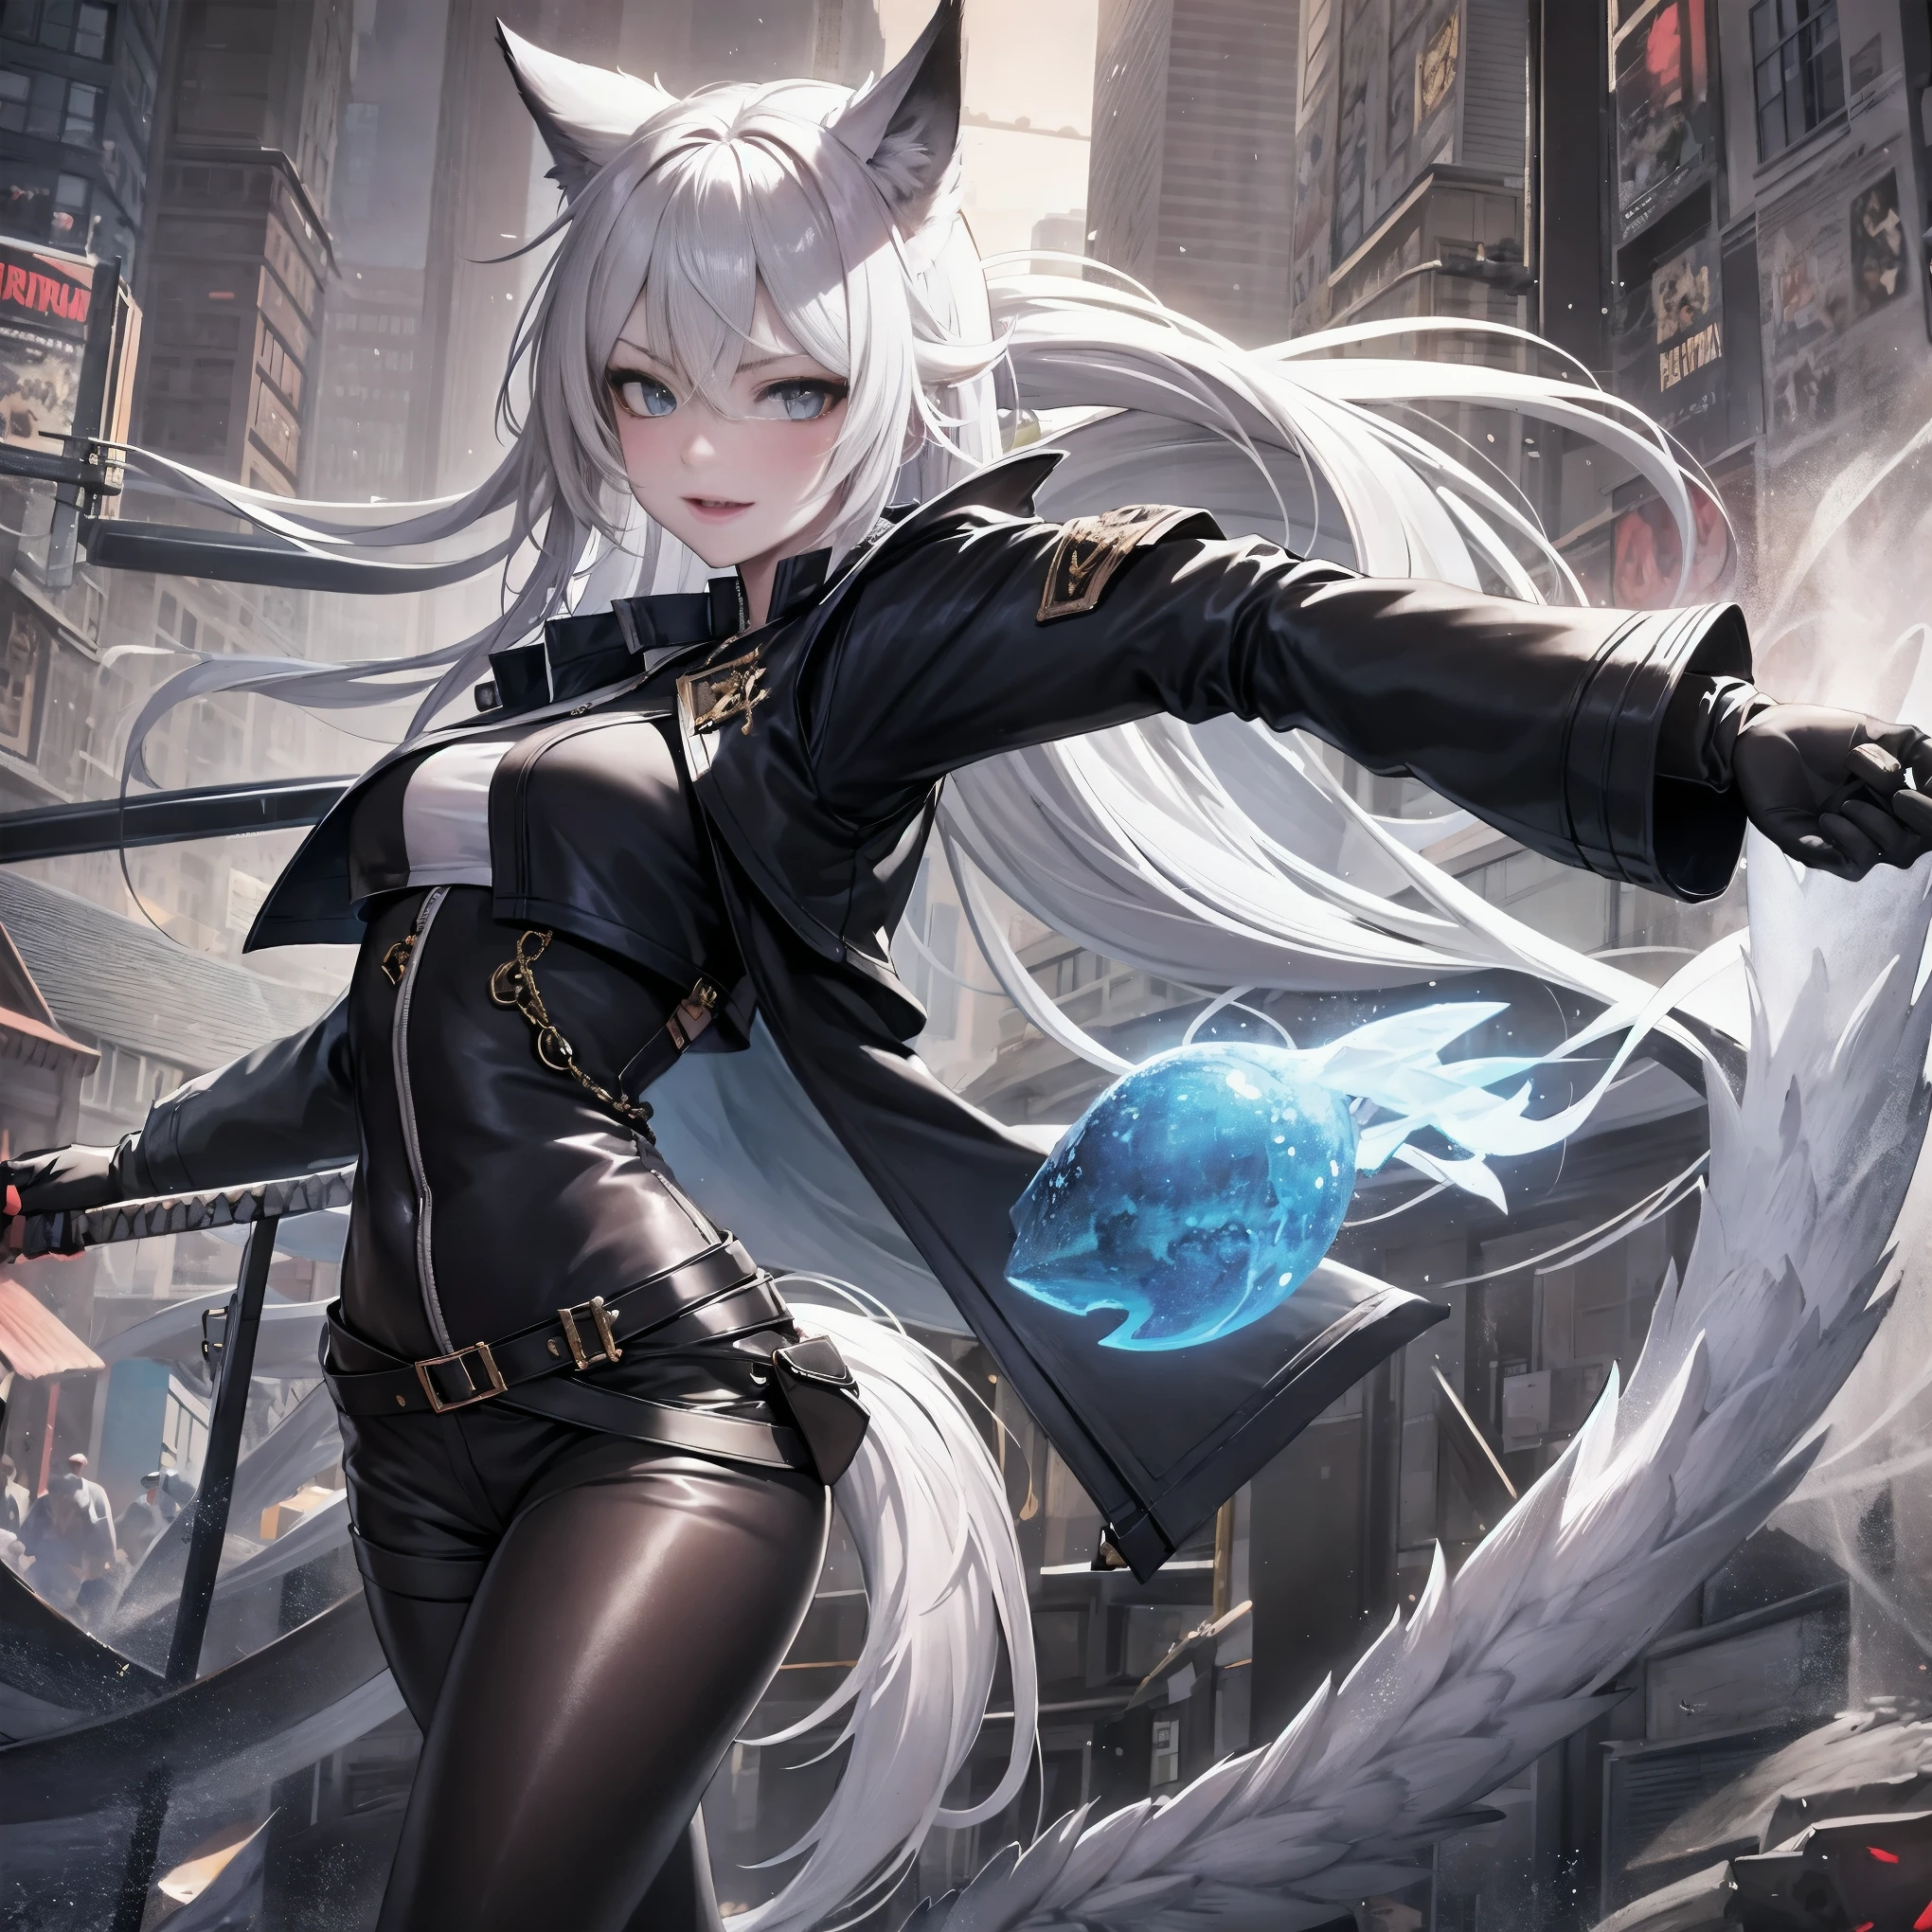 masterpiece, 8k resolution, high quality, high resolution, best quality, extremally detailed, best resolution, absurd resolution, ray tracing, high detailed, masterpiece, extremely detailed,detailed angelic face, shoulder length white hair, female, 2 white fox ears, teenage girl, slime body, white scale dragon tail, military boots,black leggings, military combat pants, black T-shirt, white jacket open, medium size chest, detailed blue eyes,solo female,1 dragon tail, tomboyish, thick dragon tail, white scales, 2 dragon wings, white fluffy dragon wings, detailed face, holding a katana sword,very detailed, amazing details,solo female, 1 female, detailed two white furry dragon wings